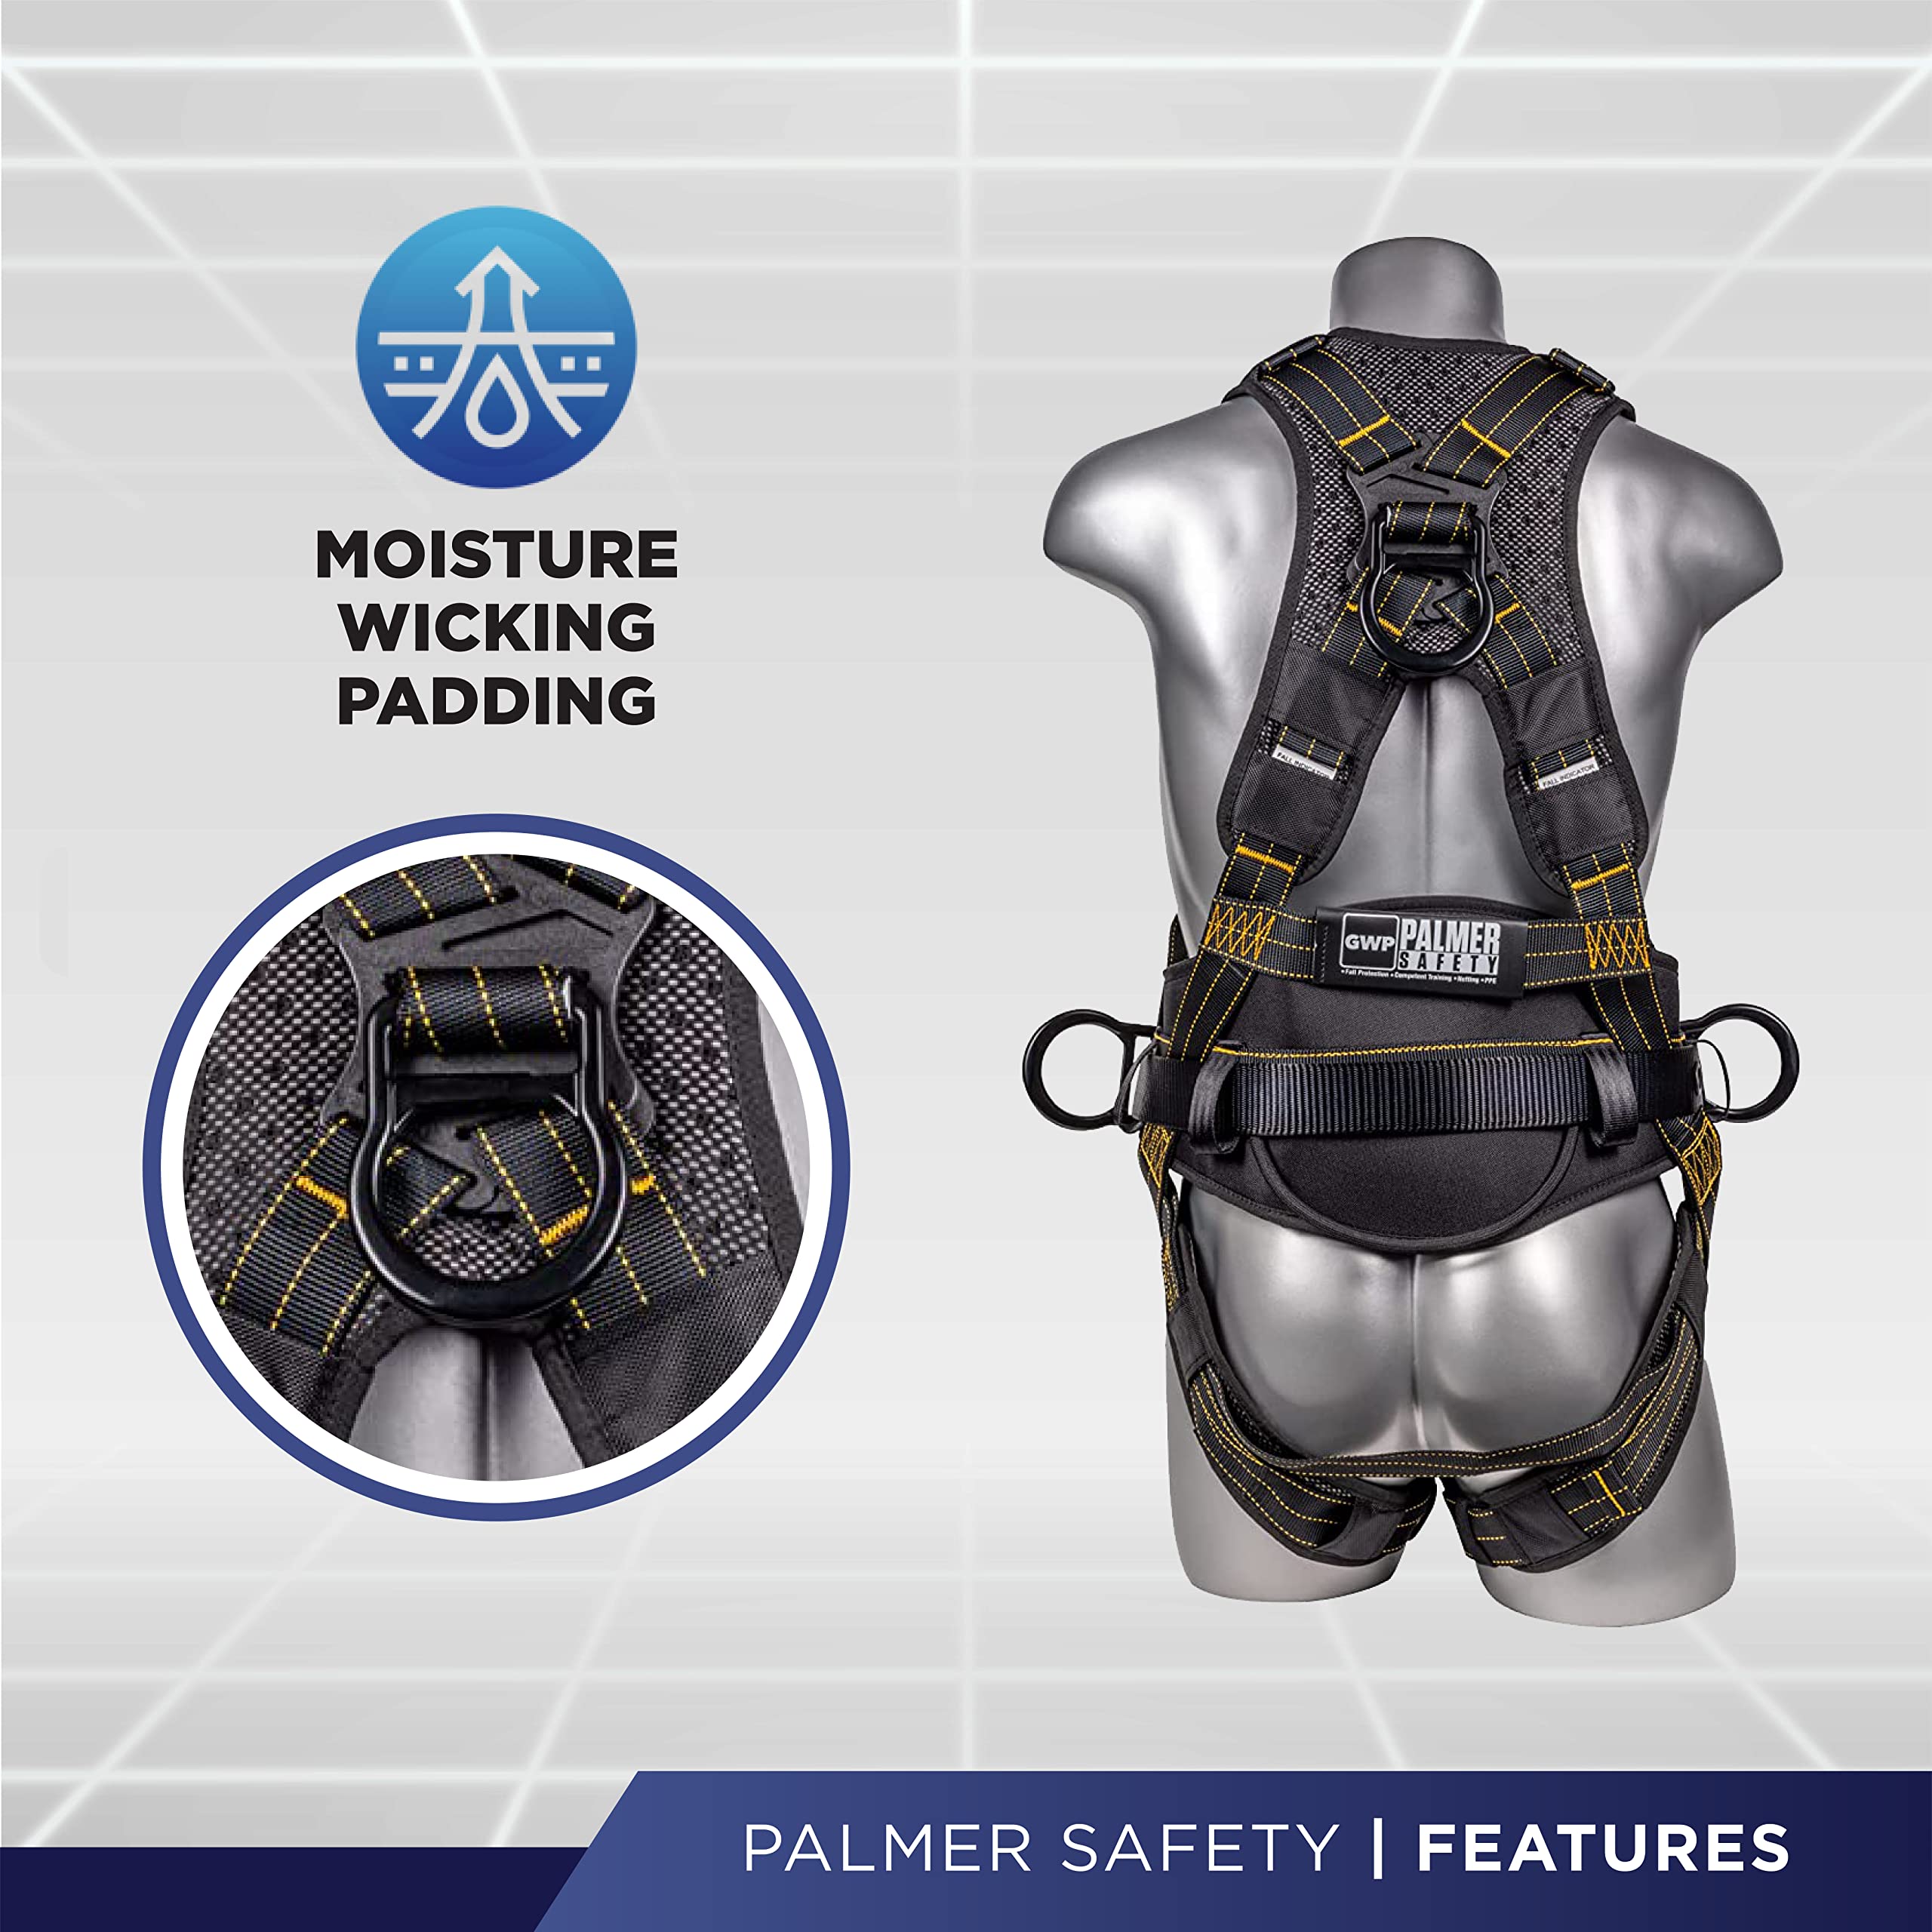 Palmer Safety Fall Protection Construction Safety Harness - QCB Chest and Legs - Aluminum D-Rings - Oil and Dust Resistant